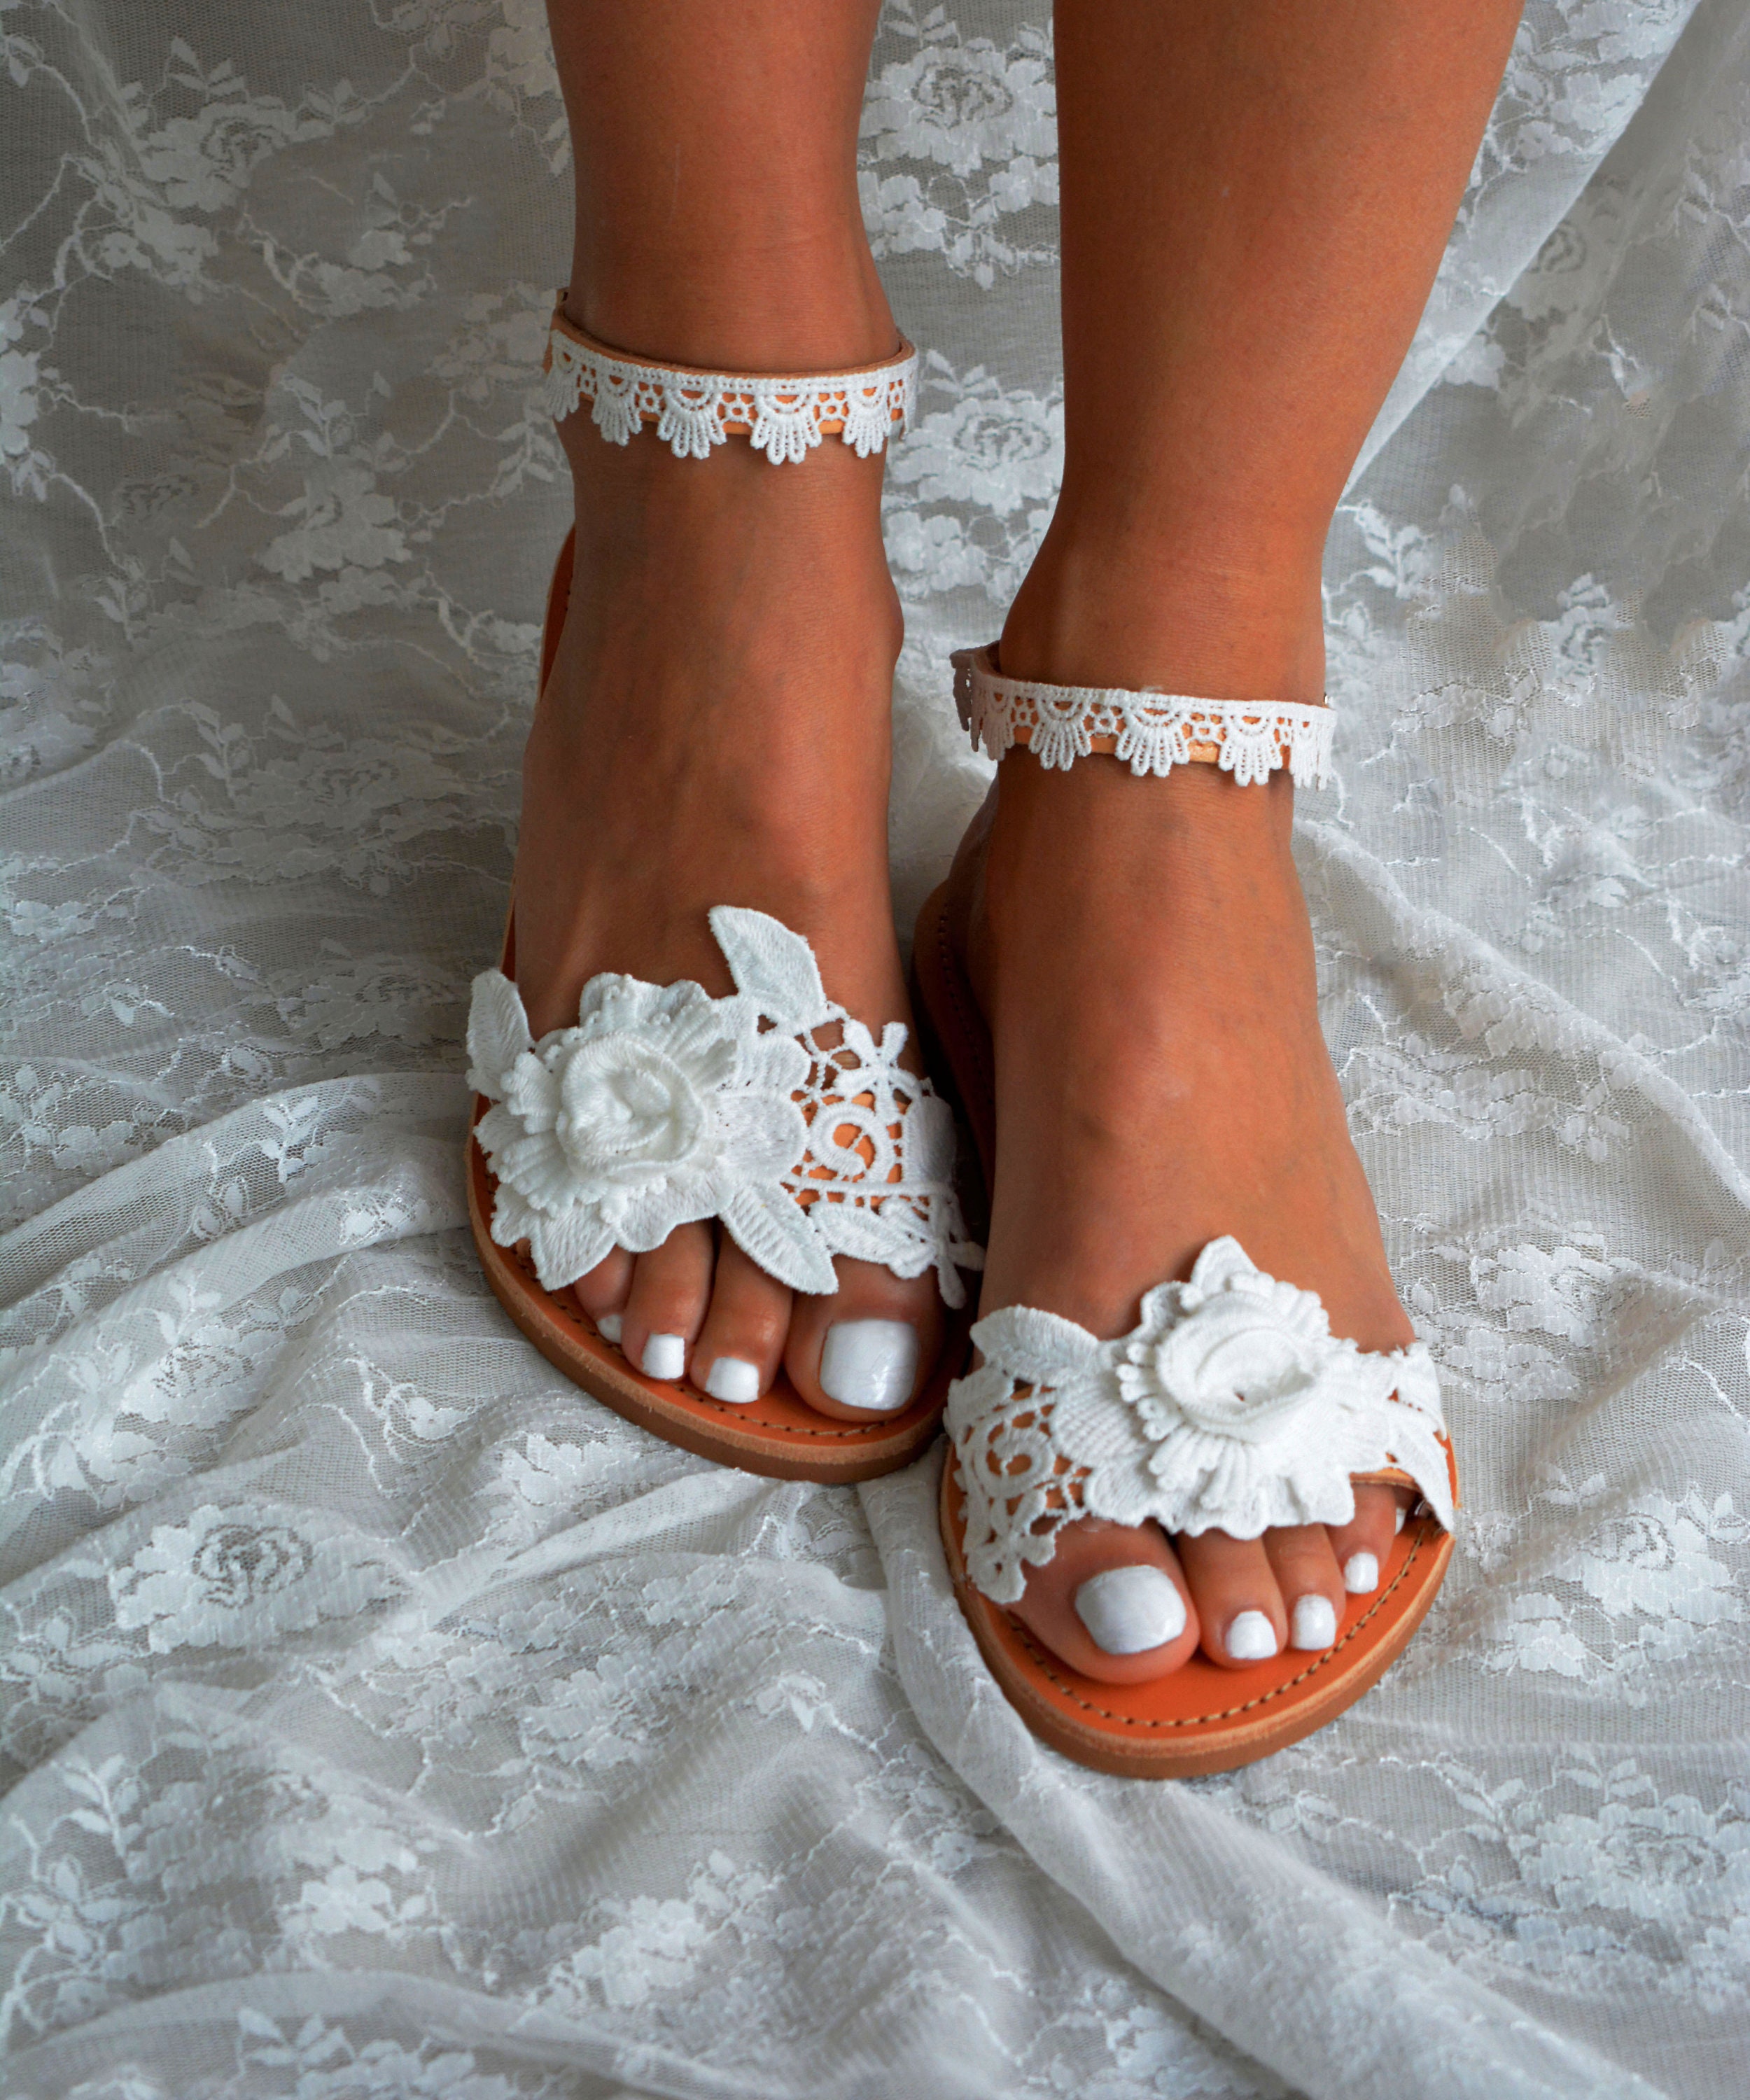 Handmade to order Bridal sandals Wedding sandals White Lace | Etsy